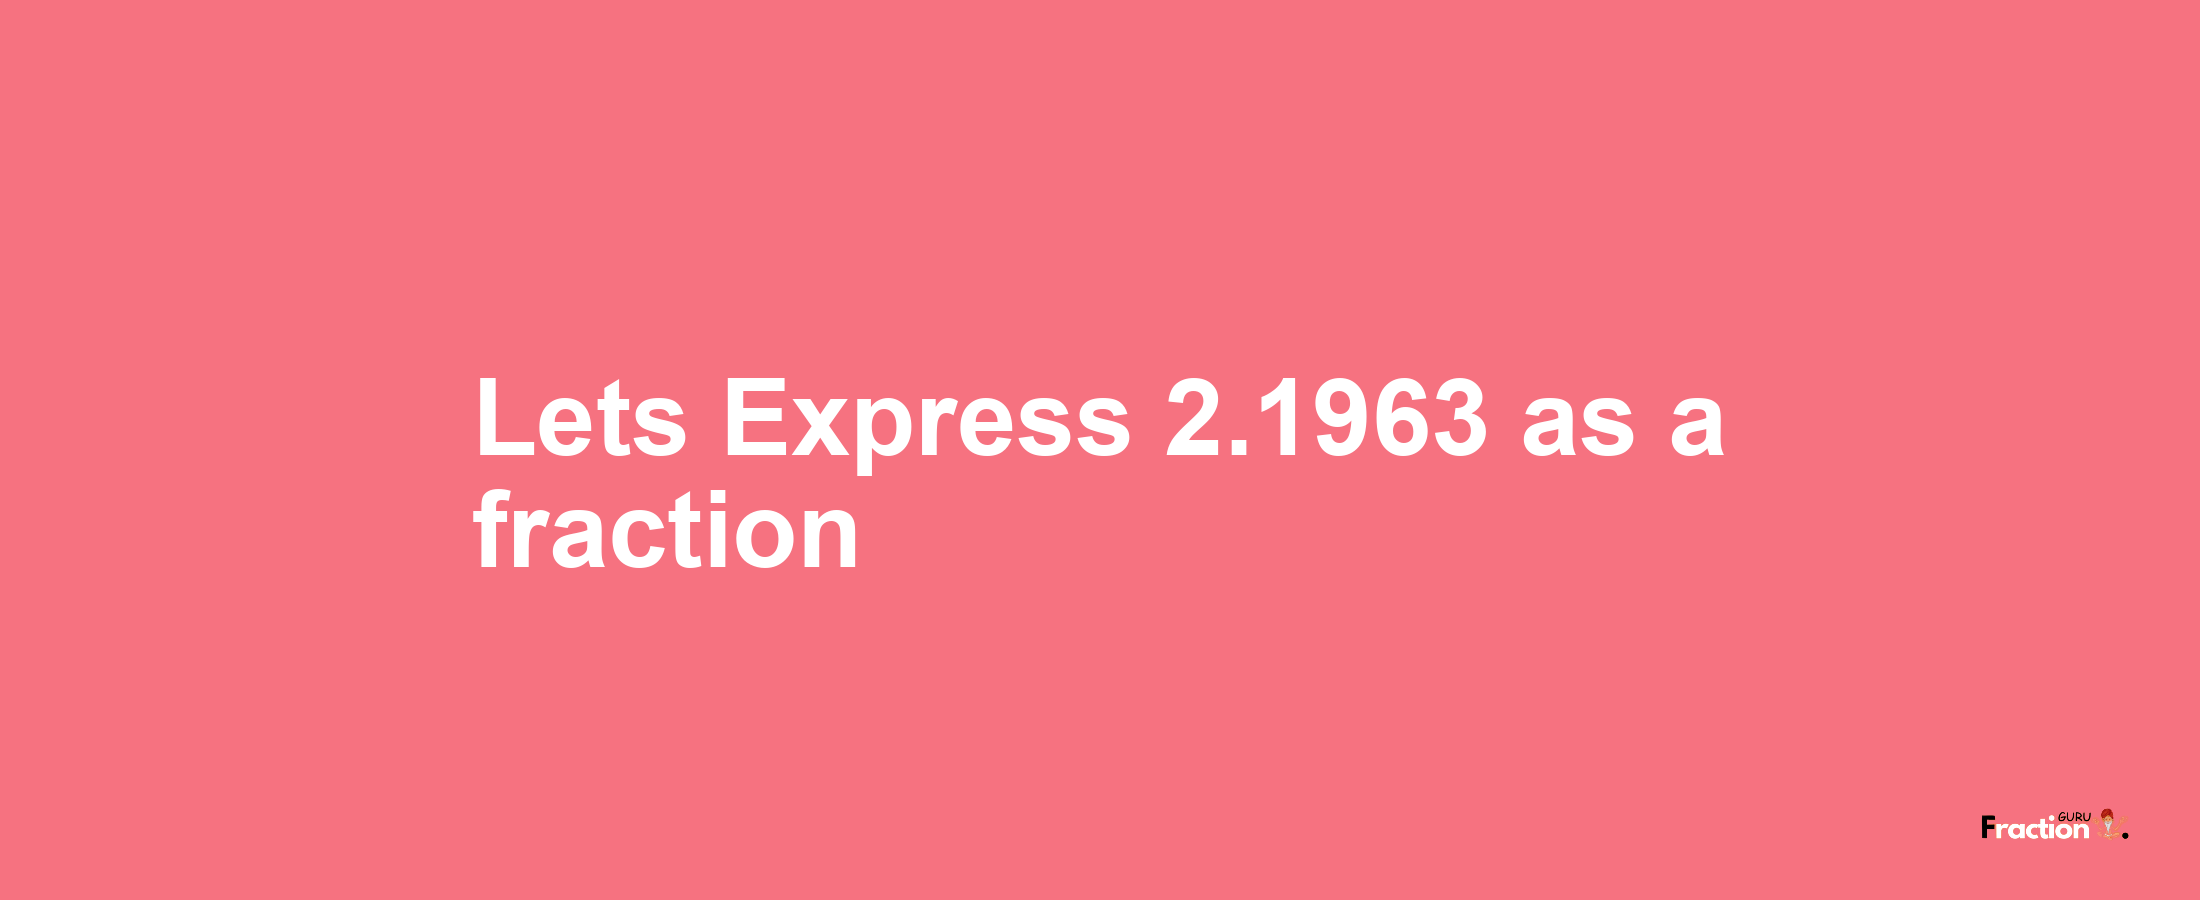 Lets Express 2.1963 as afraction